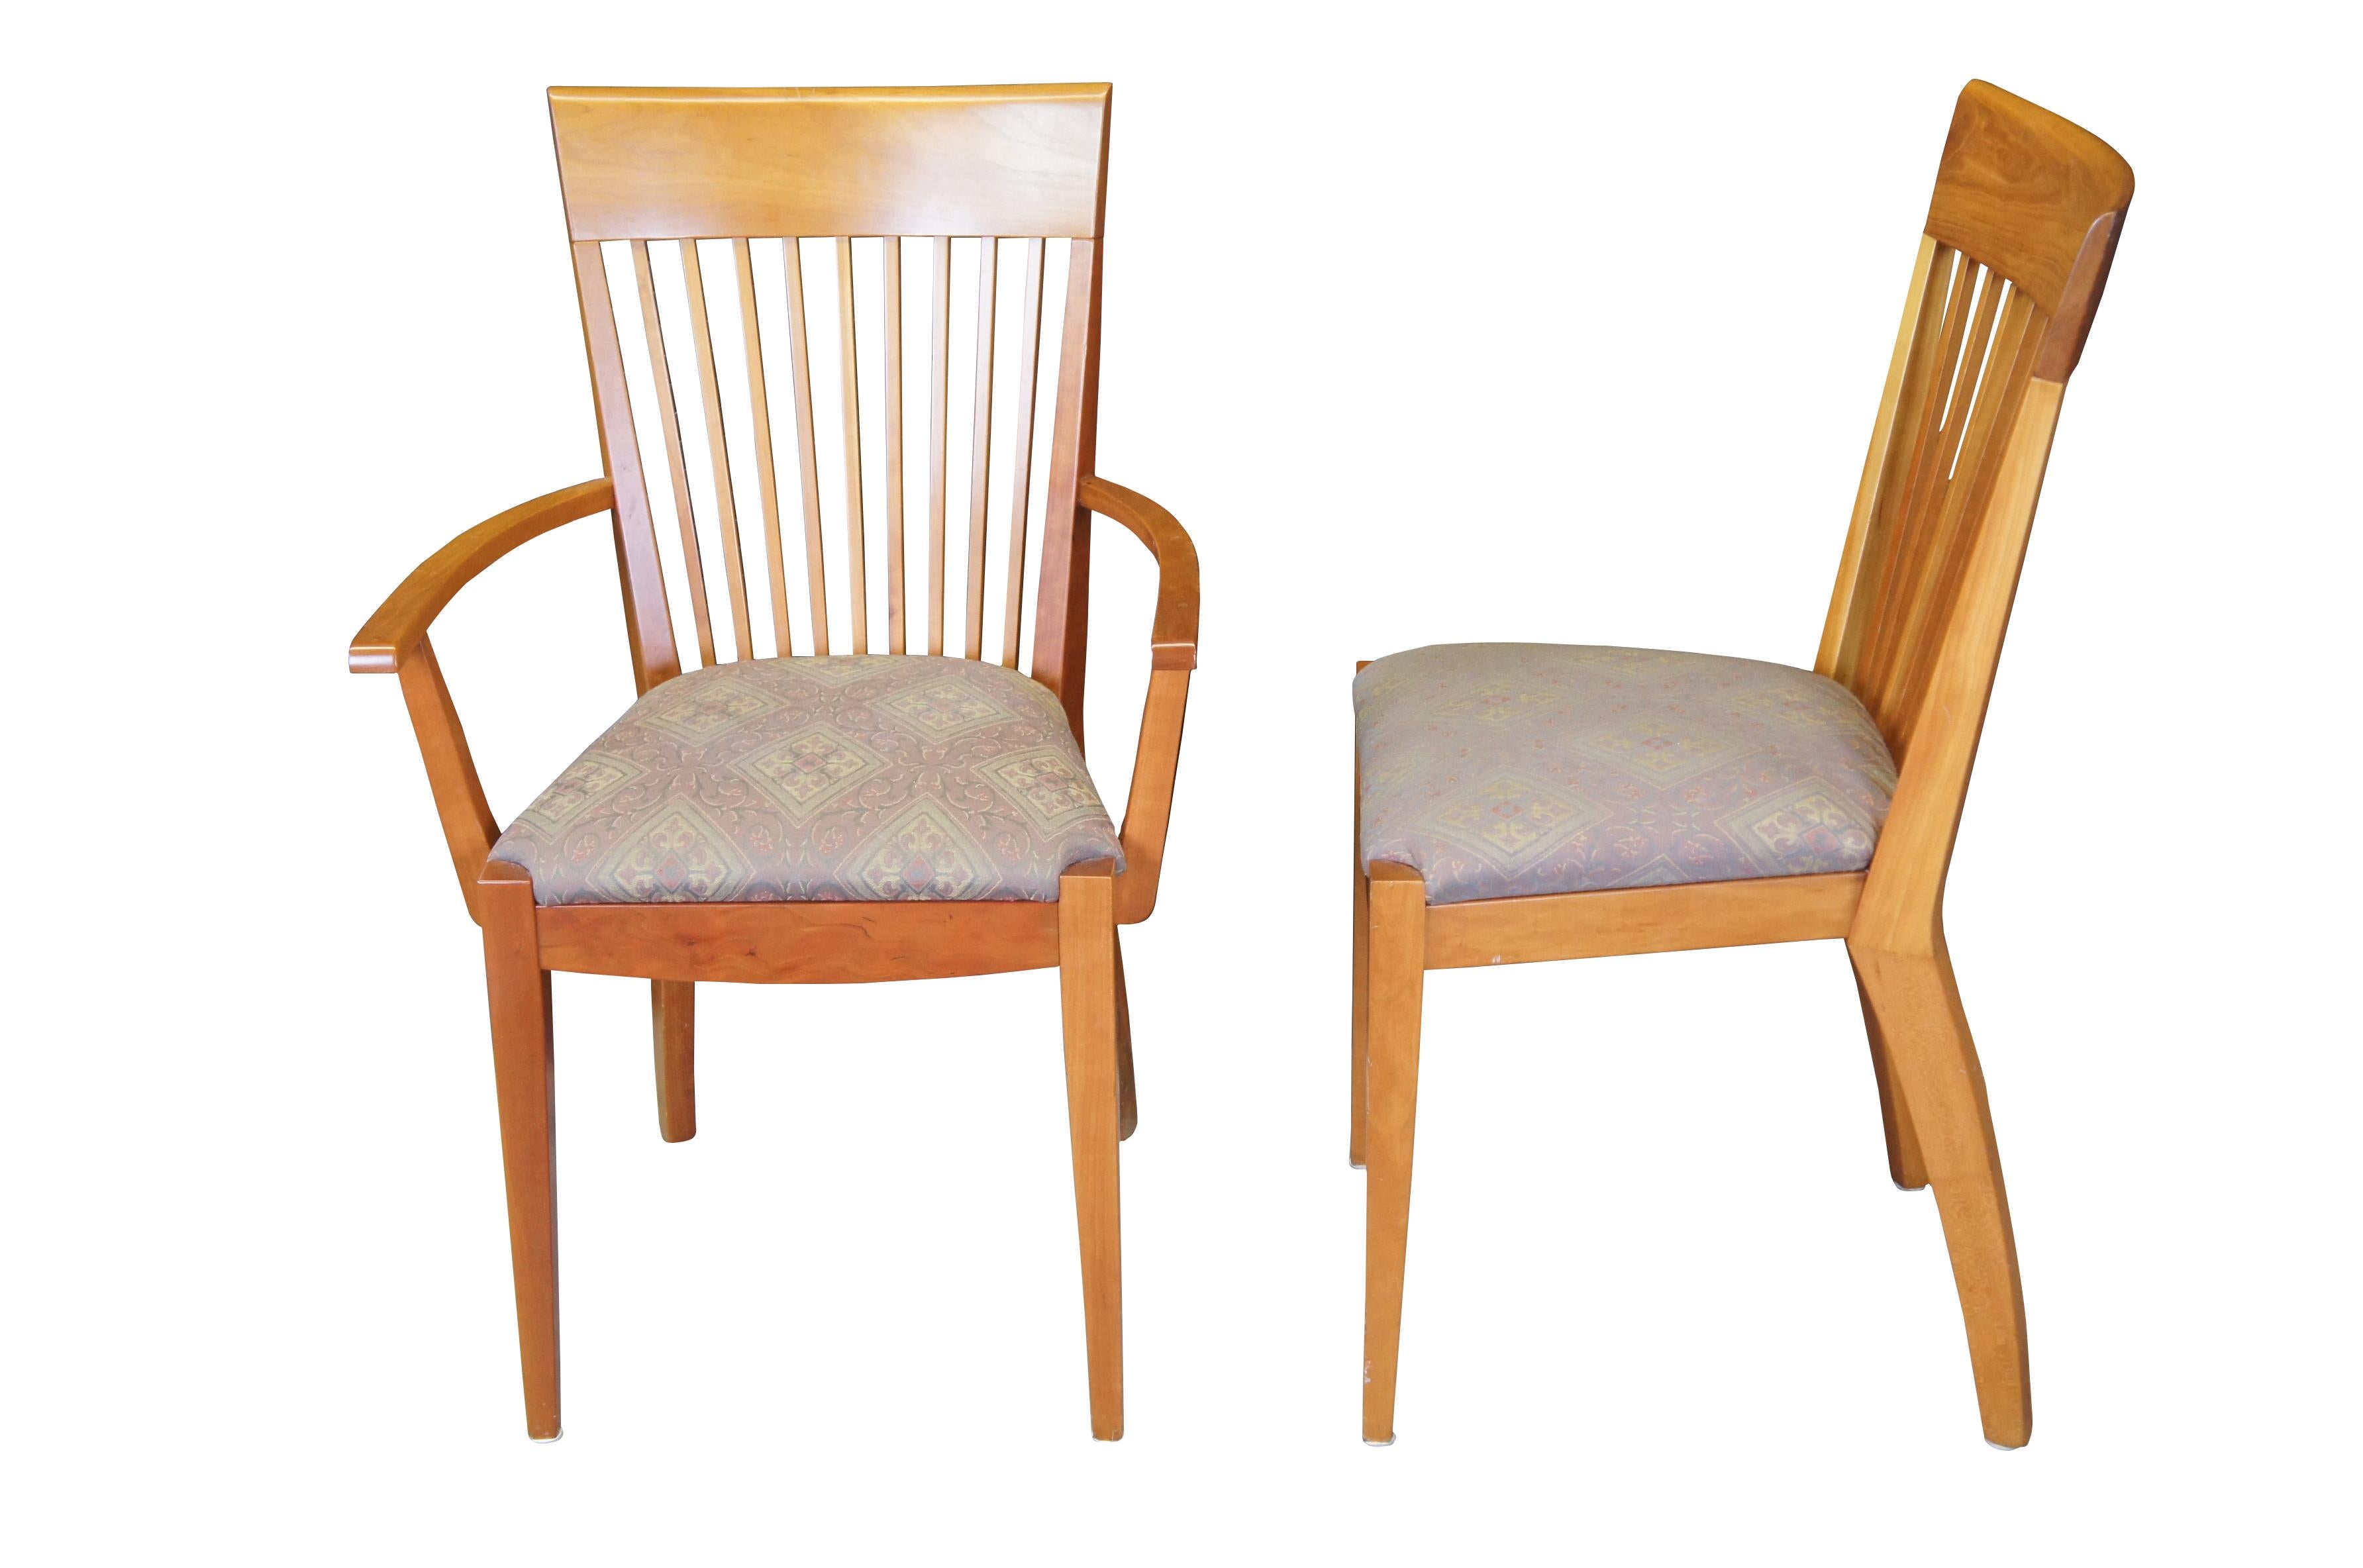 8 Vintage Arhaus farmhouse dining chairs. Made from cherry exclusively for Arhaus in Italy. Features a contoured crest rail, slat back and upholstered seat. The chairs are supported by square tapered legs. Upholstery has a diamond brocade pattern.